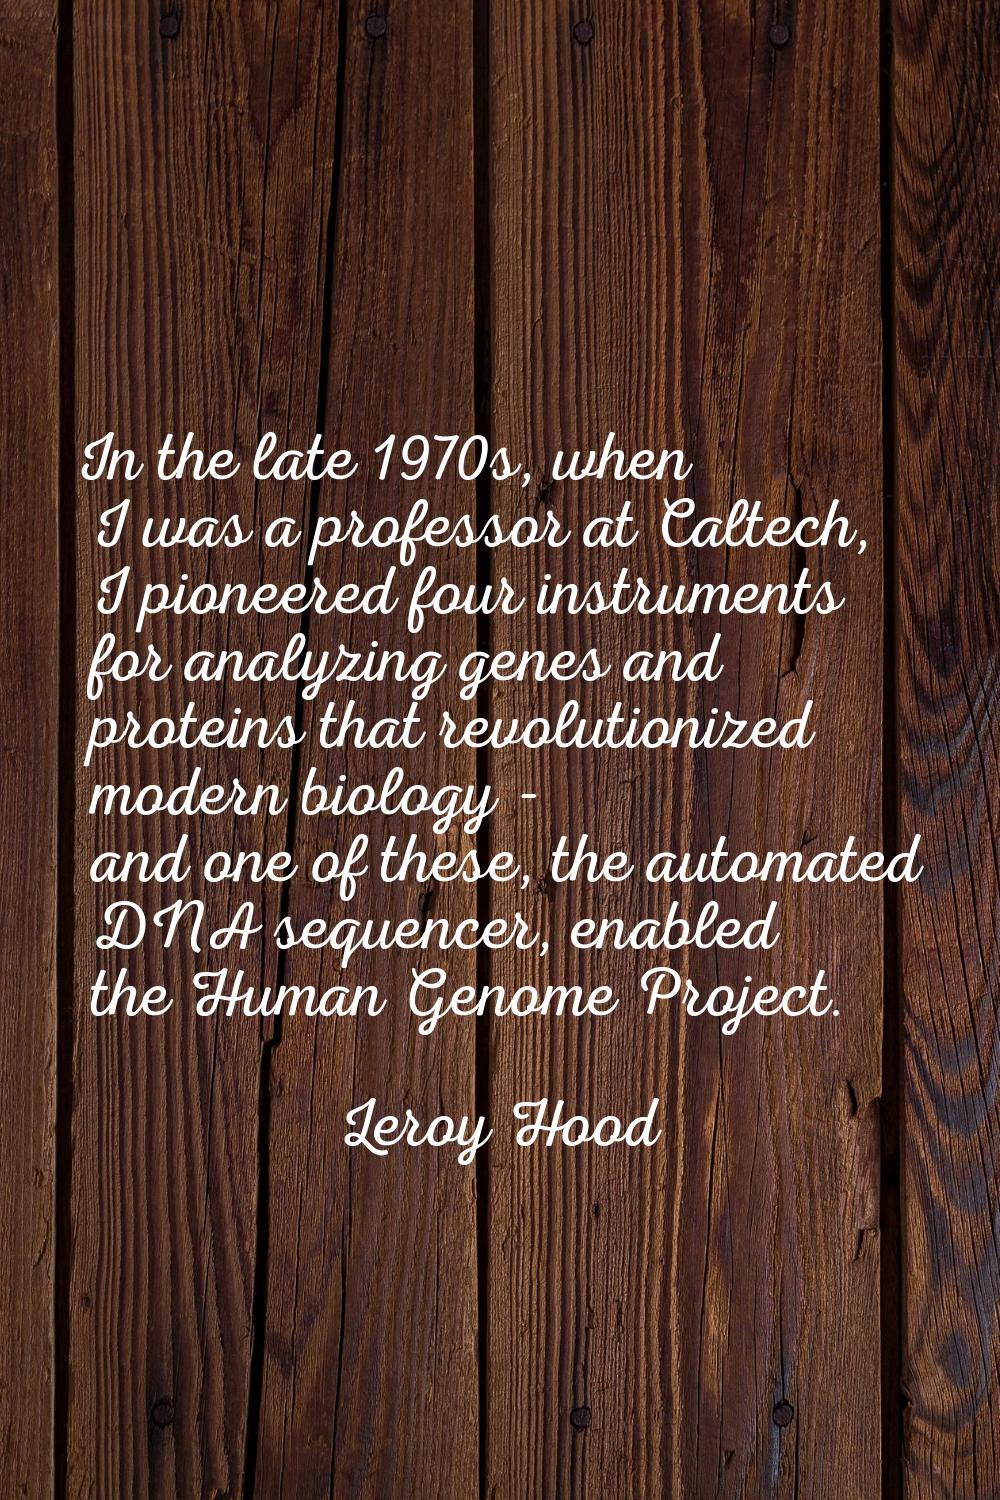 In the late 1970s, when I was a professor at Caltech, I pioneered four instruments for analyzing ge